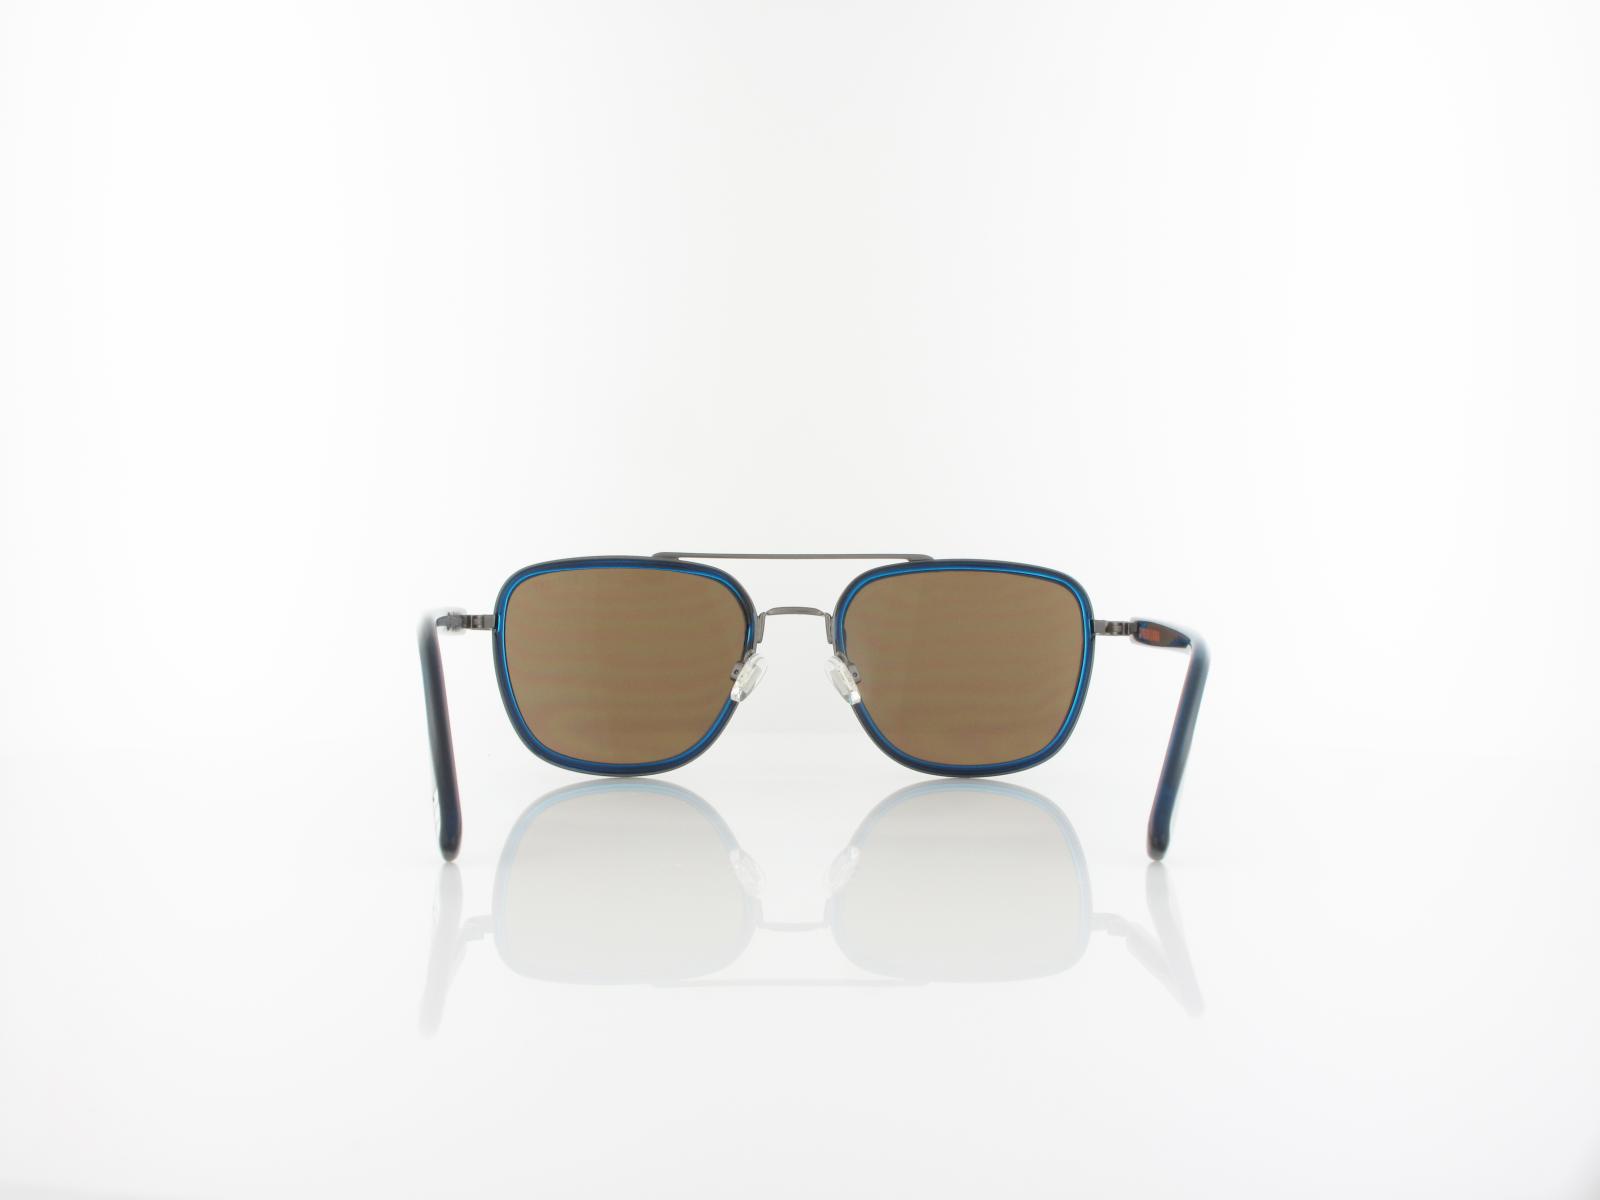 Superdry | Studios nyc 106 56 | navy / solid brown with silver mirror